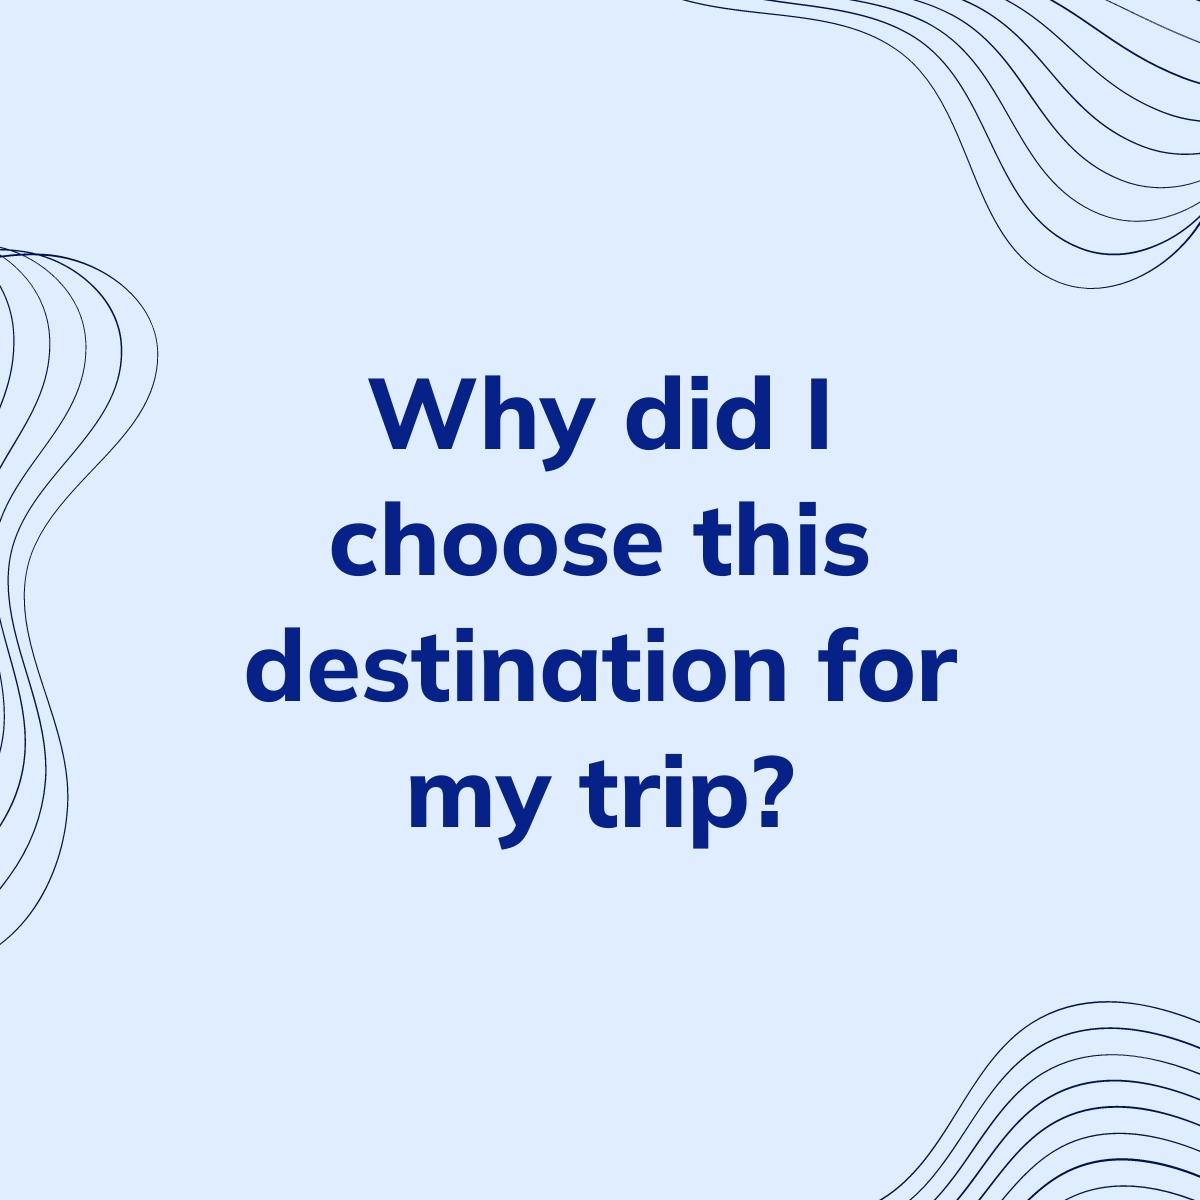 Journal Prompt: Why did I choose this destination for my trip?